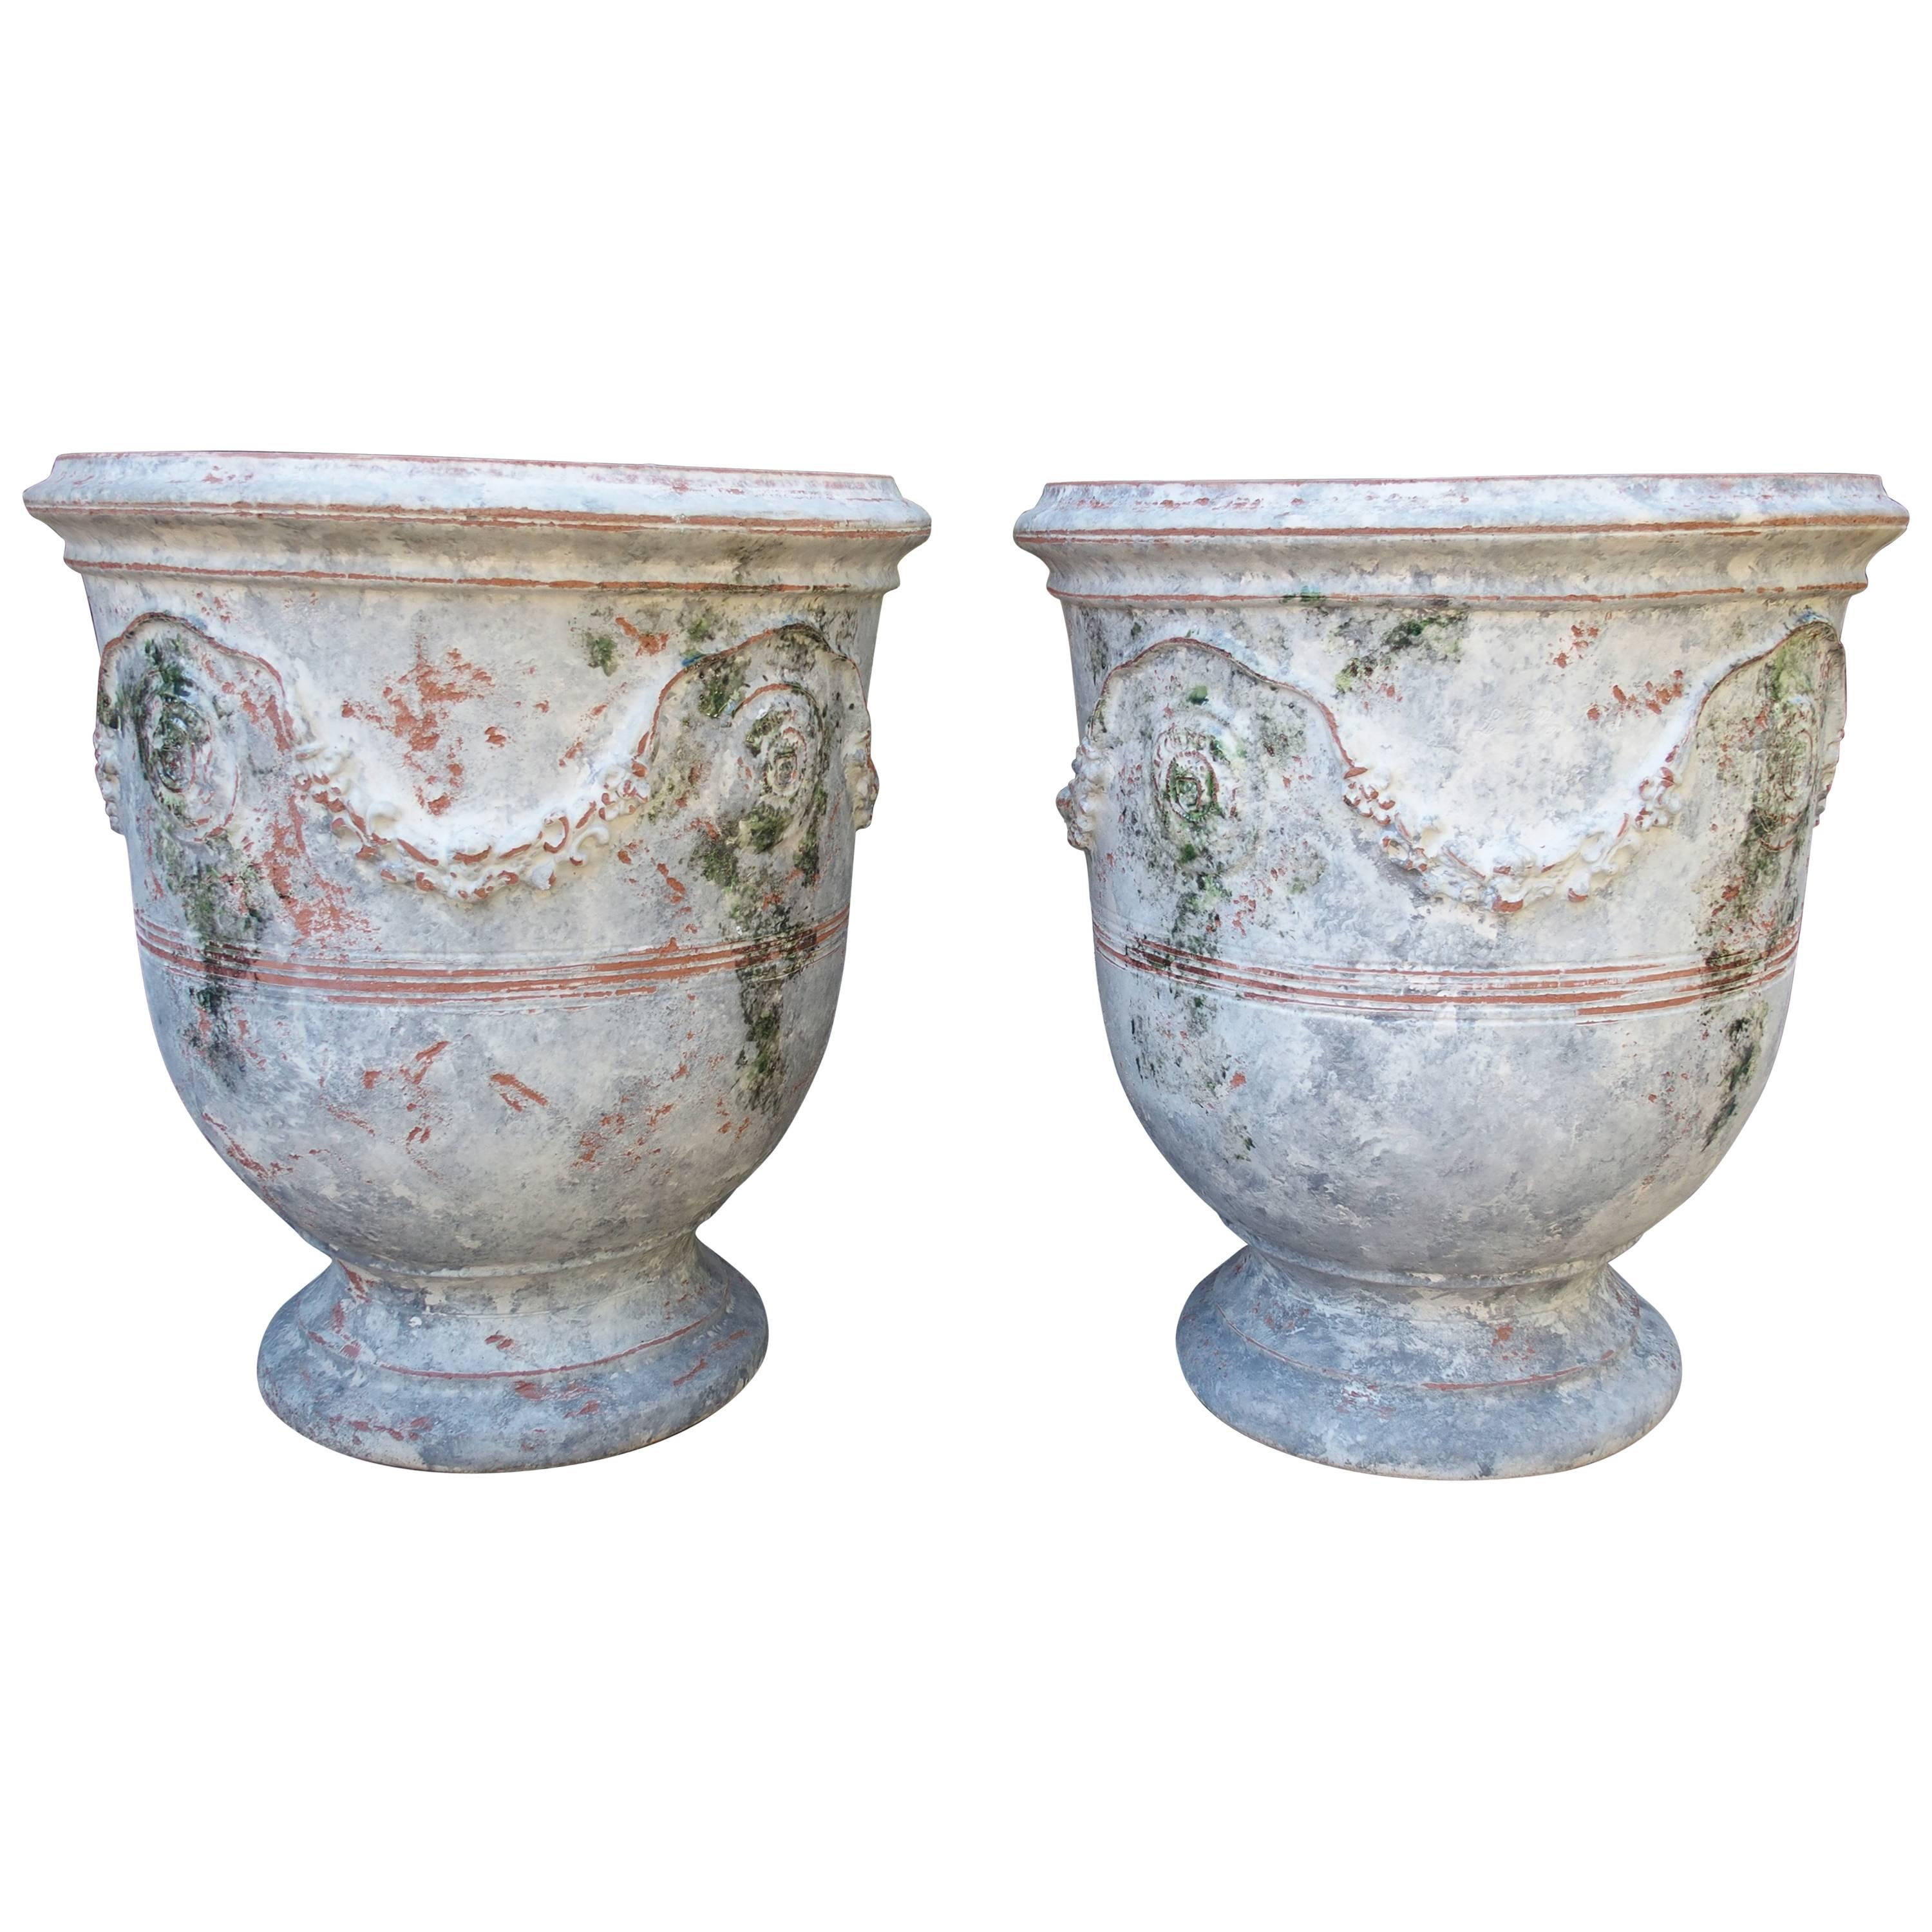 Pair of Large Painted and Distressed Anduze Pots, France